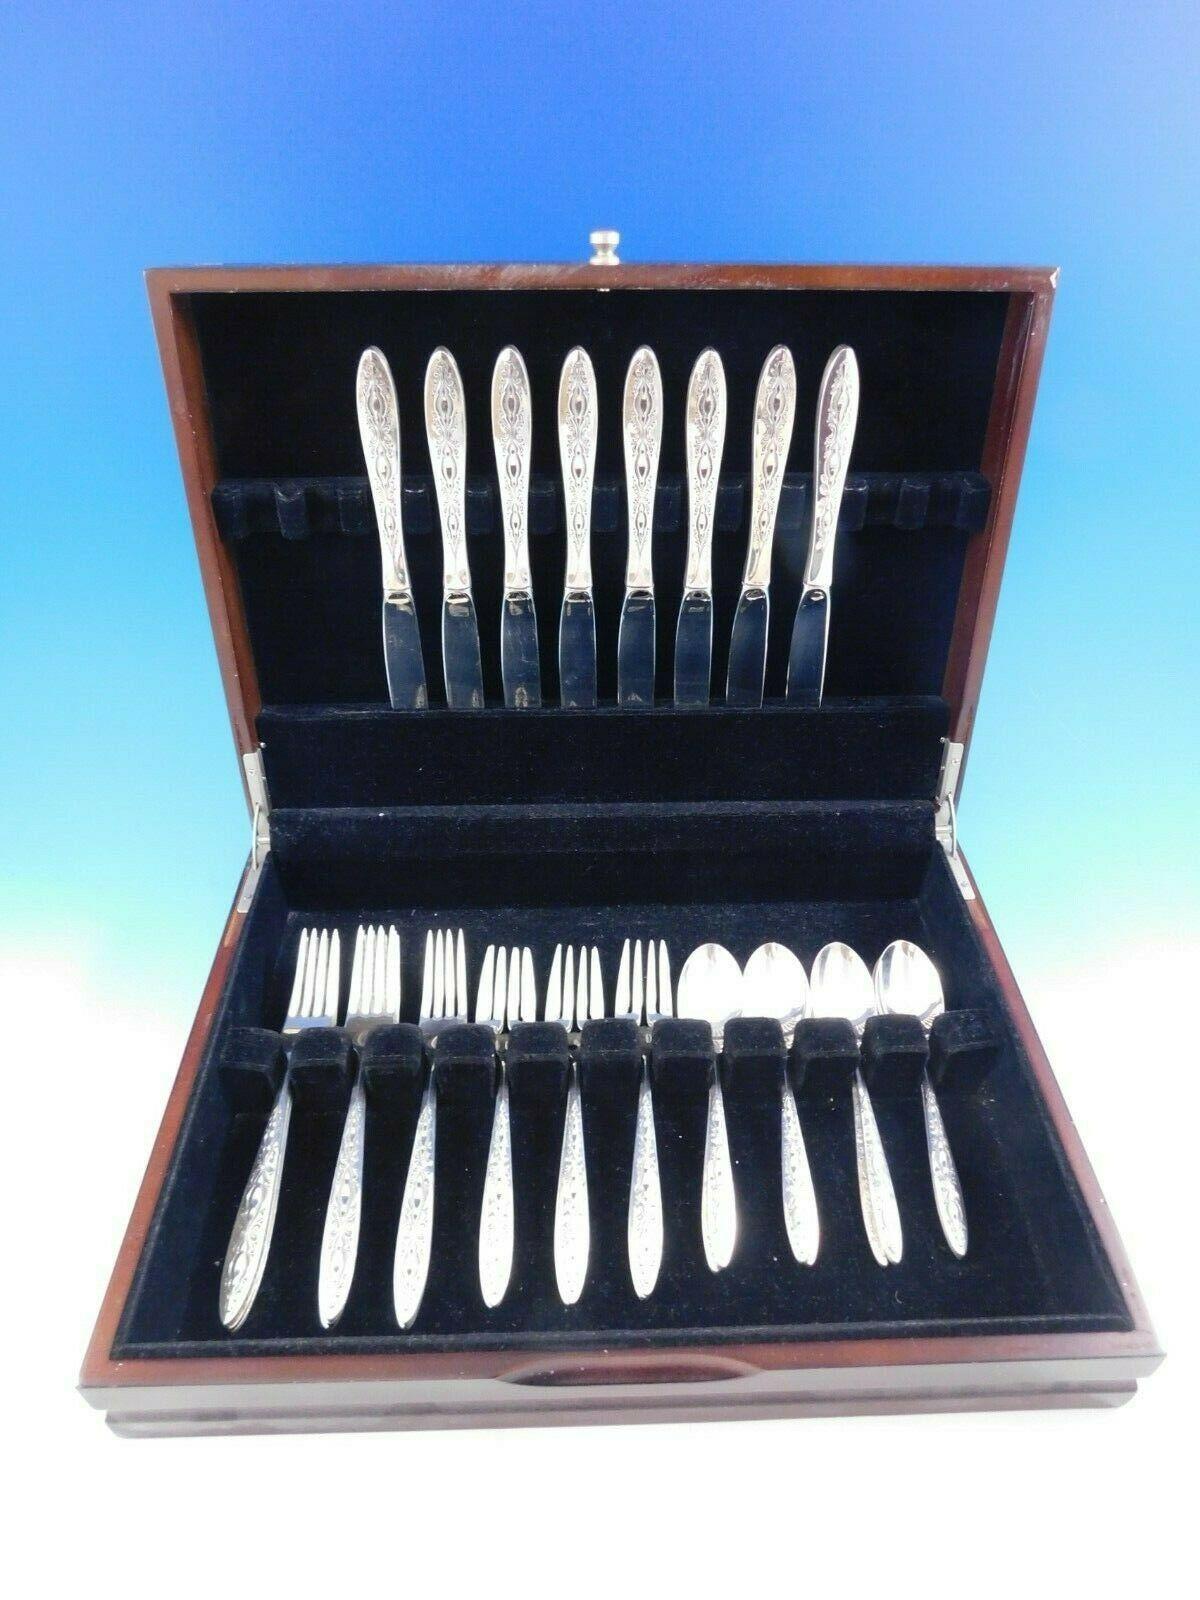 Exquisite bridal lace by Lunt sterling silver flatware set - 32 pieces. This set includes:

8 regular knives, 9 1/8